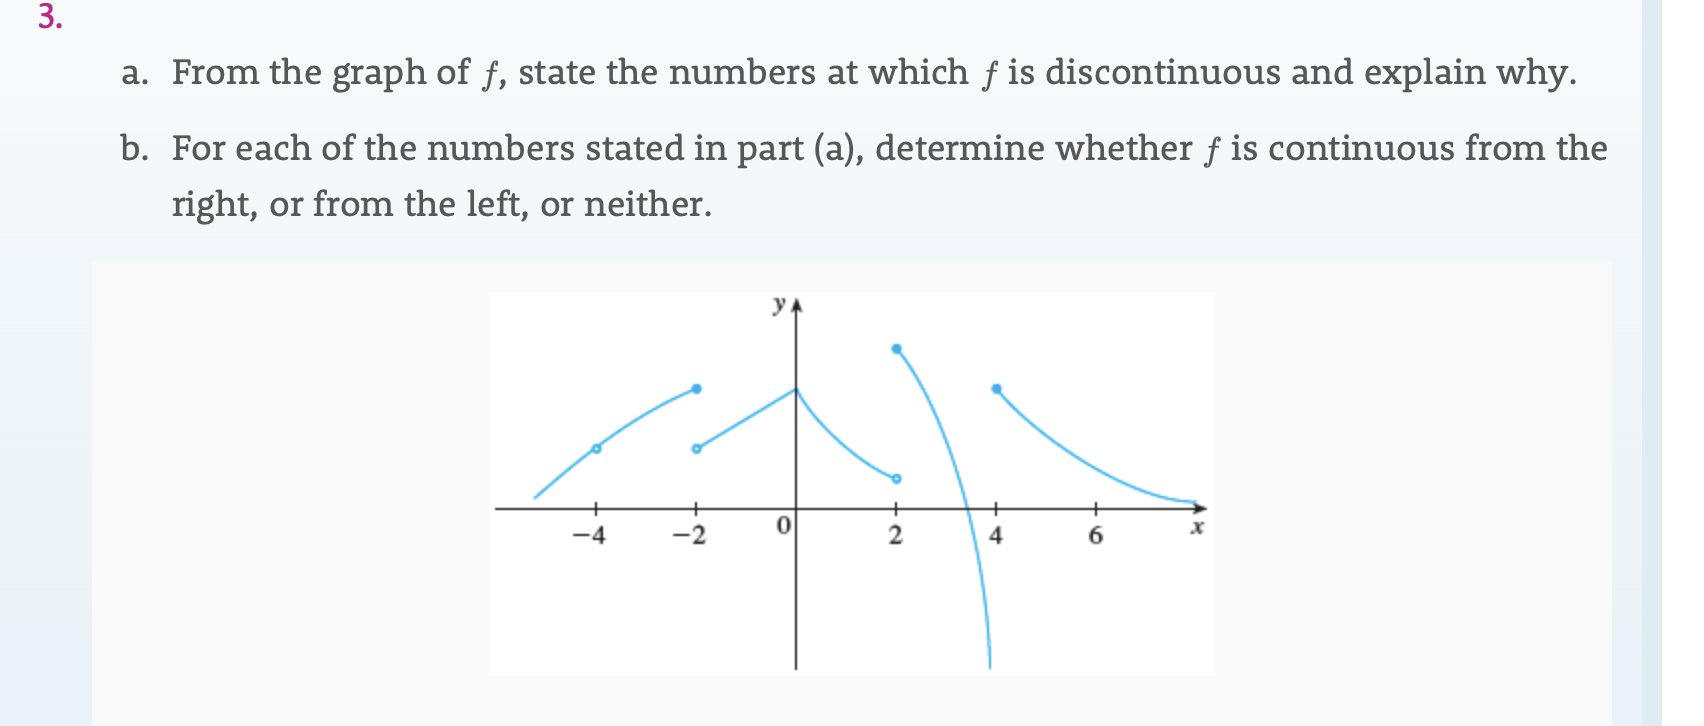 3.
a. From the graph of f, state the numbers at which f is discontinuous and explain why.
b. For each of the numbers stated in part (a), determine whether f is continuous from the
right, or from the left, or neither.
2
4
